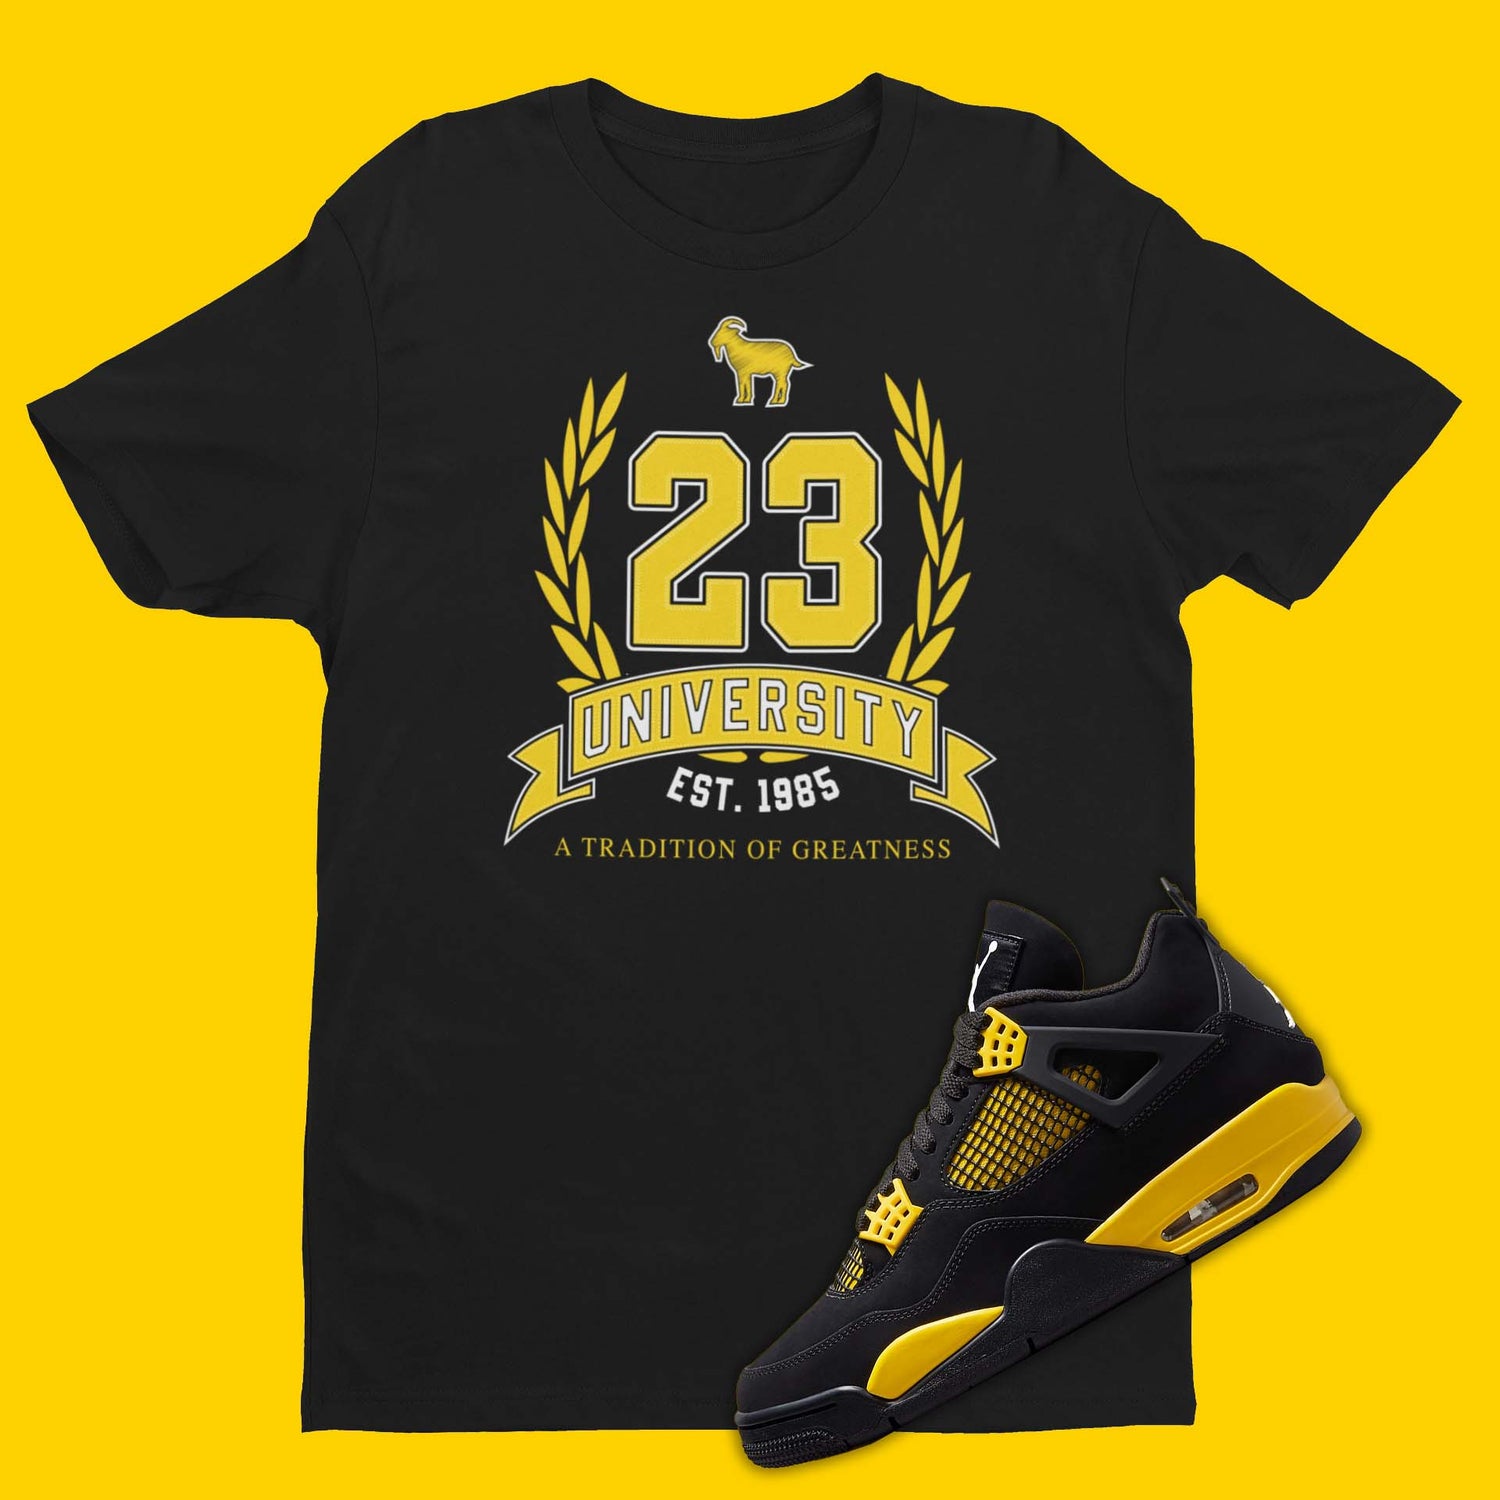 23 University crew neck black t-shirt with 'A tradition of greatness' design inspired by Air Jordan 4 Thunder sneakers.